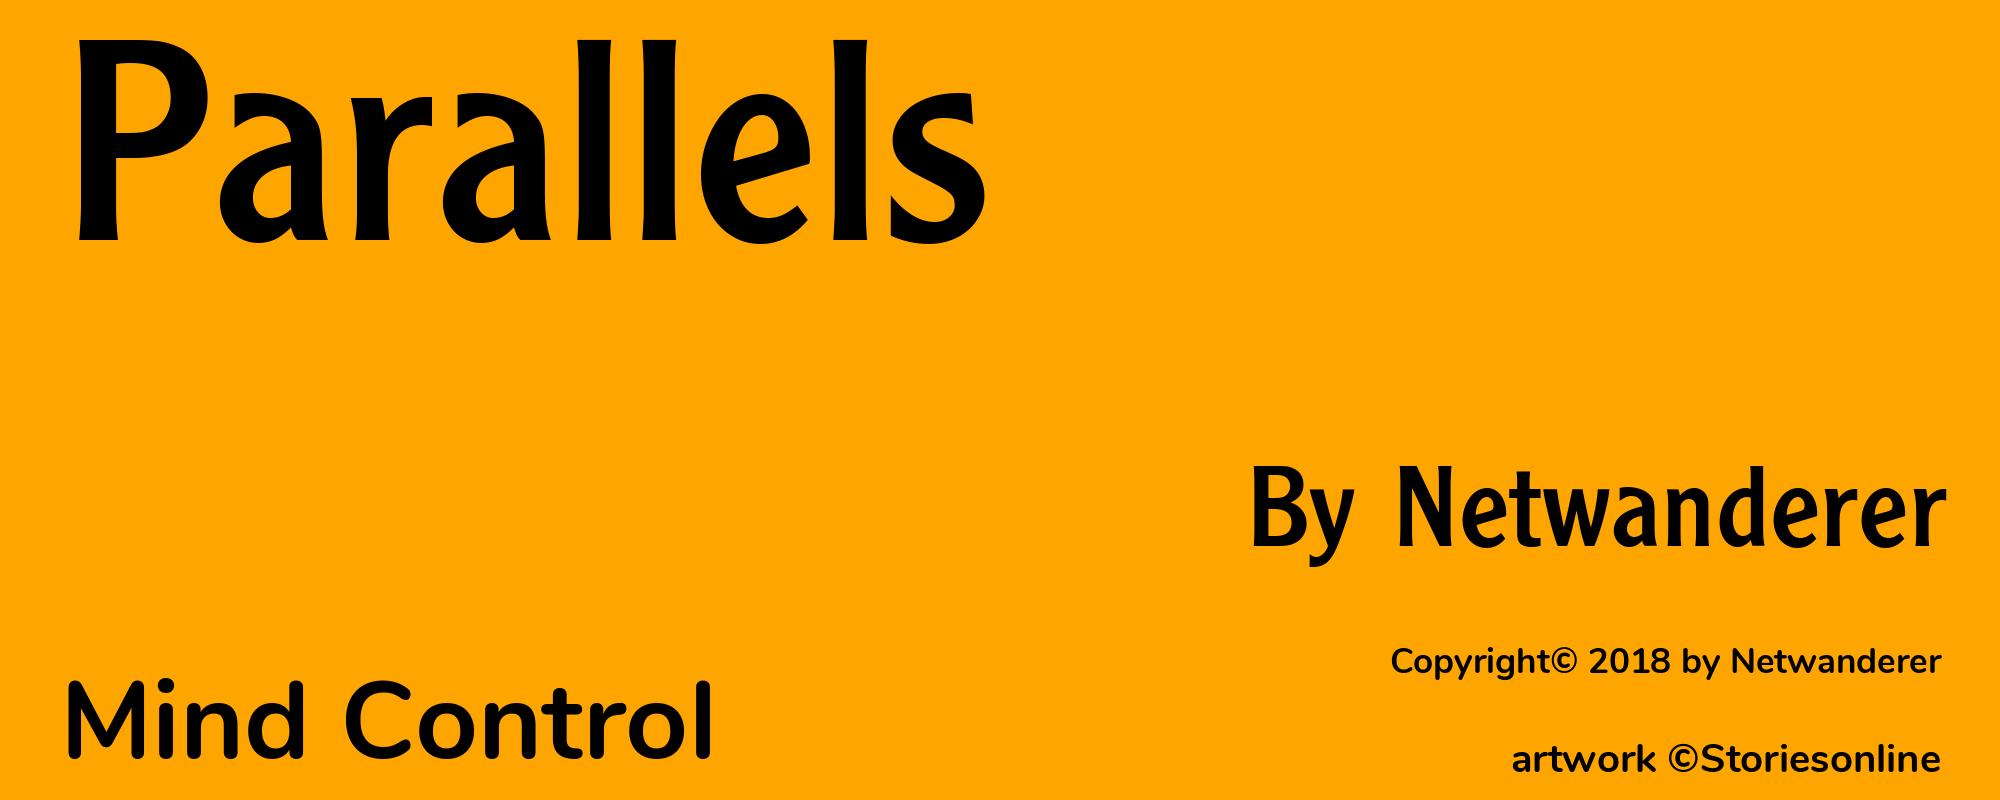 Parallels - Cover